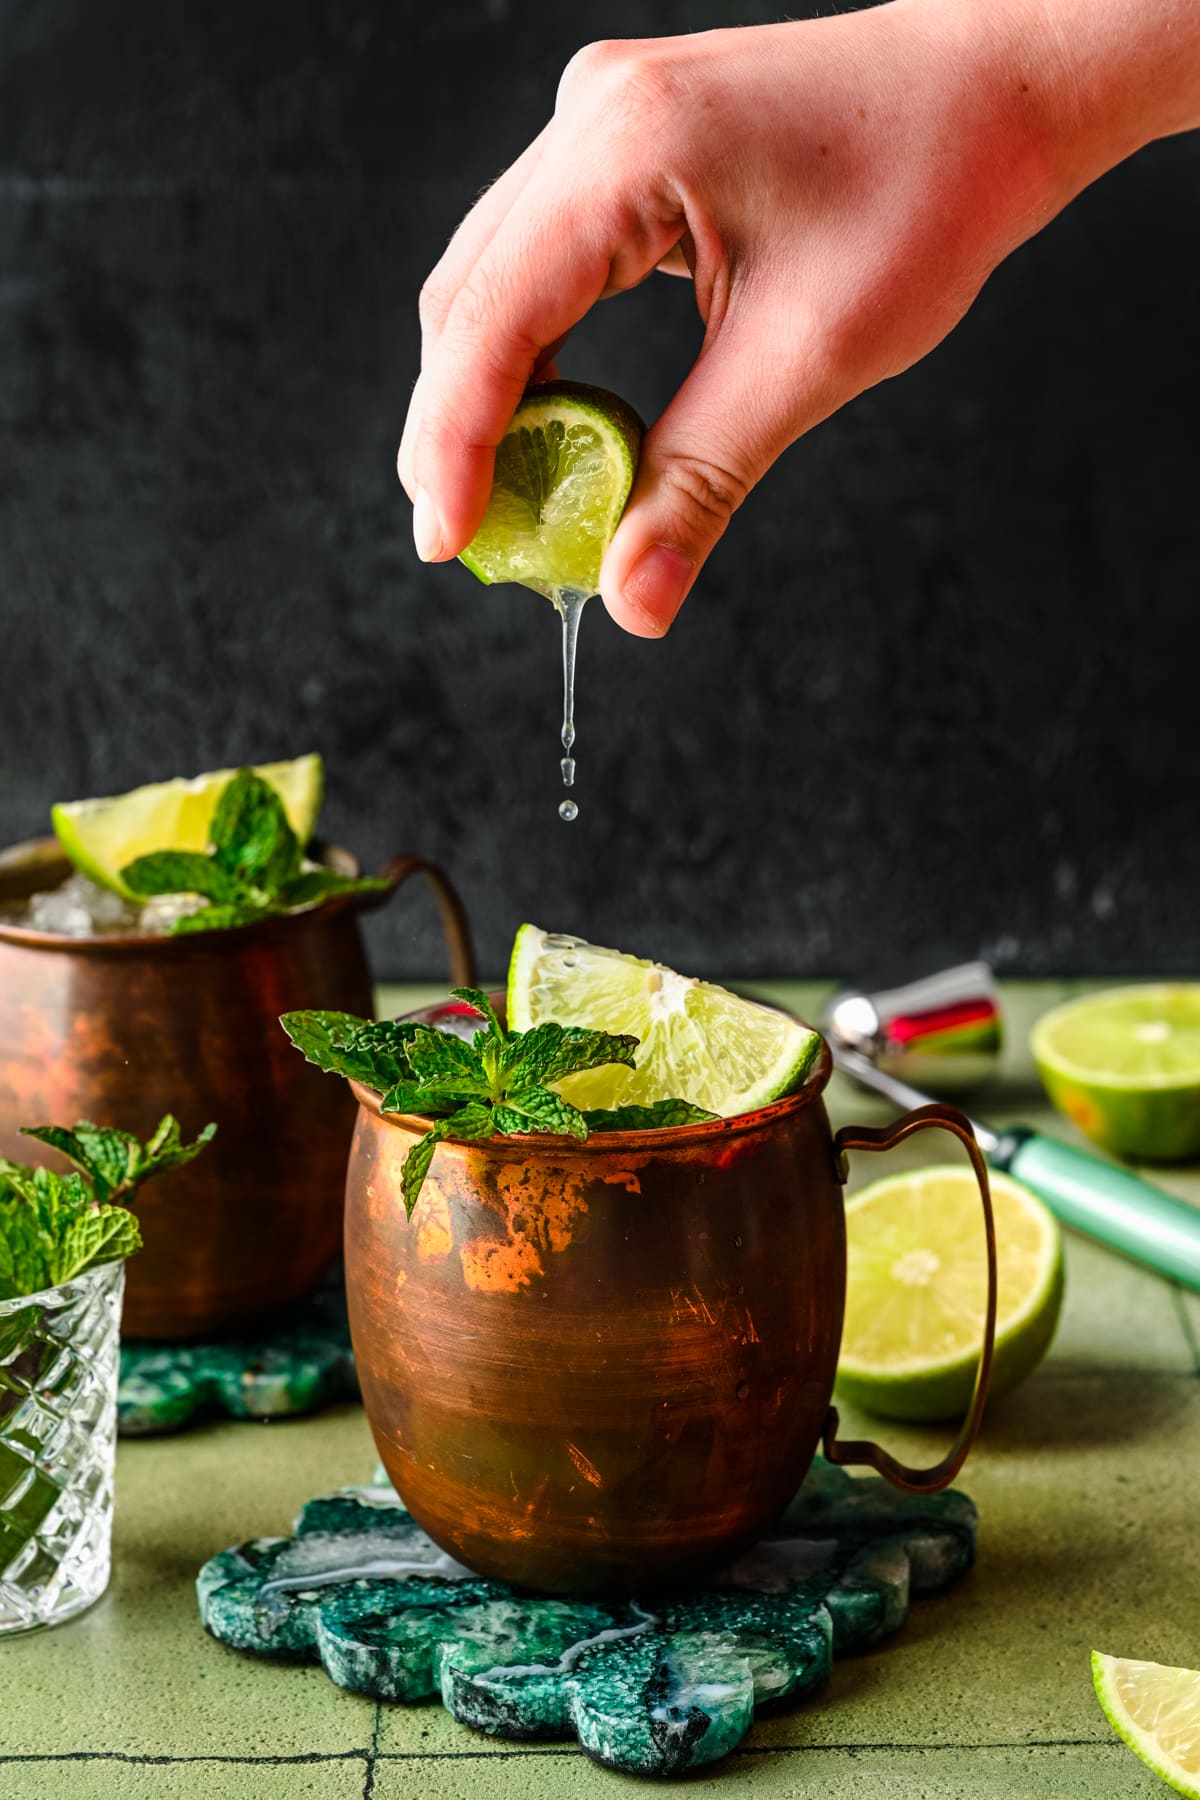 Squeezing a lime into the finished mules.